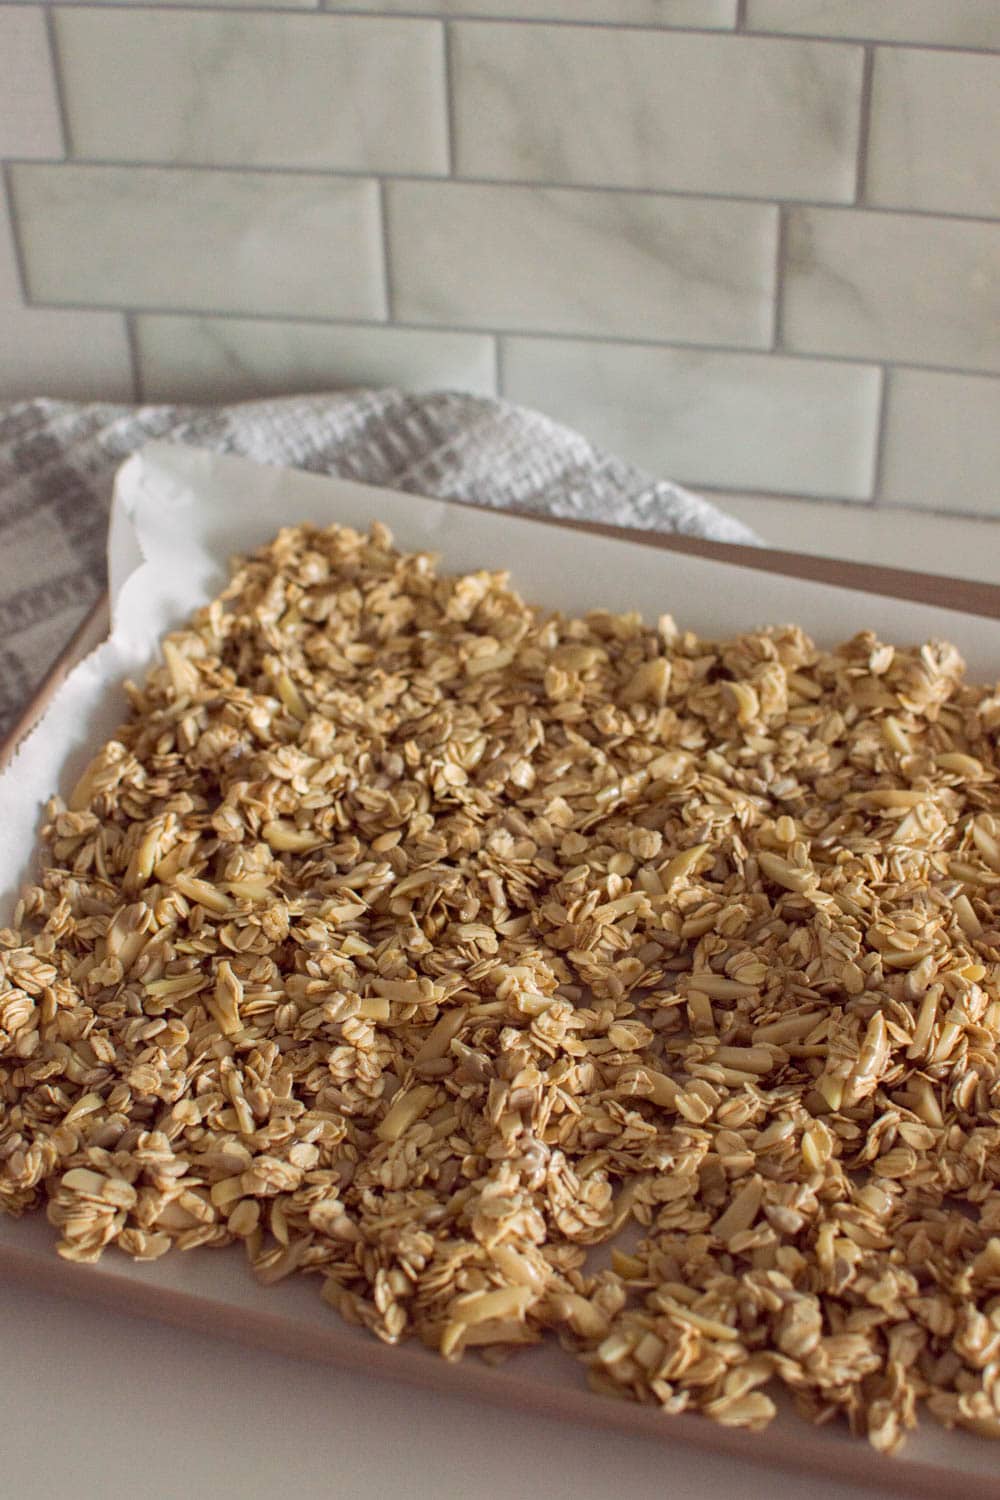 Laying out granola mixture on a cookie sheet, ready for baking